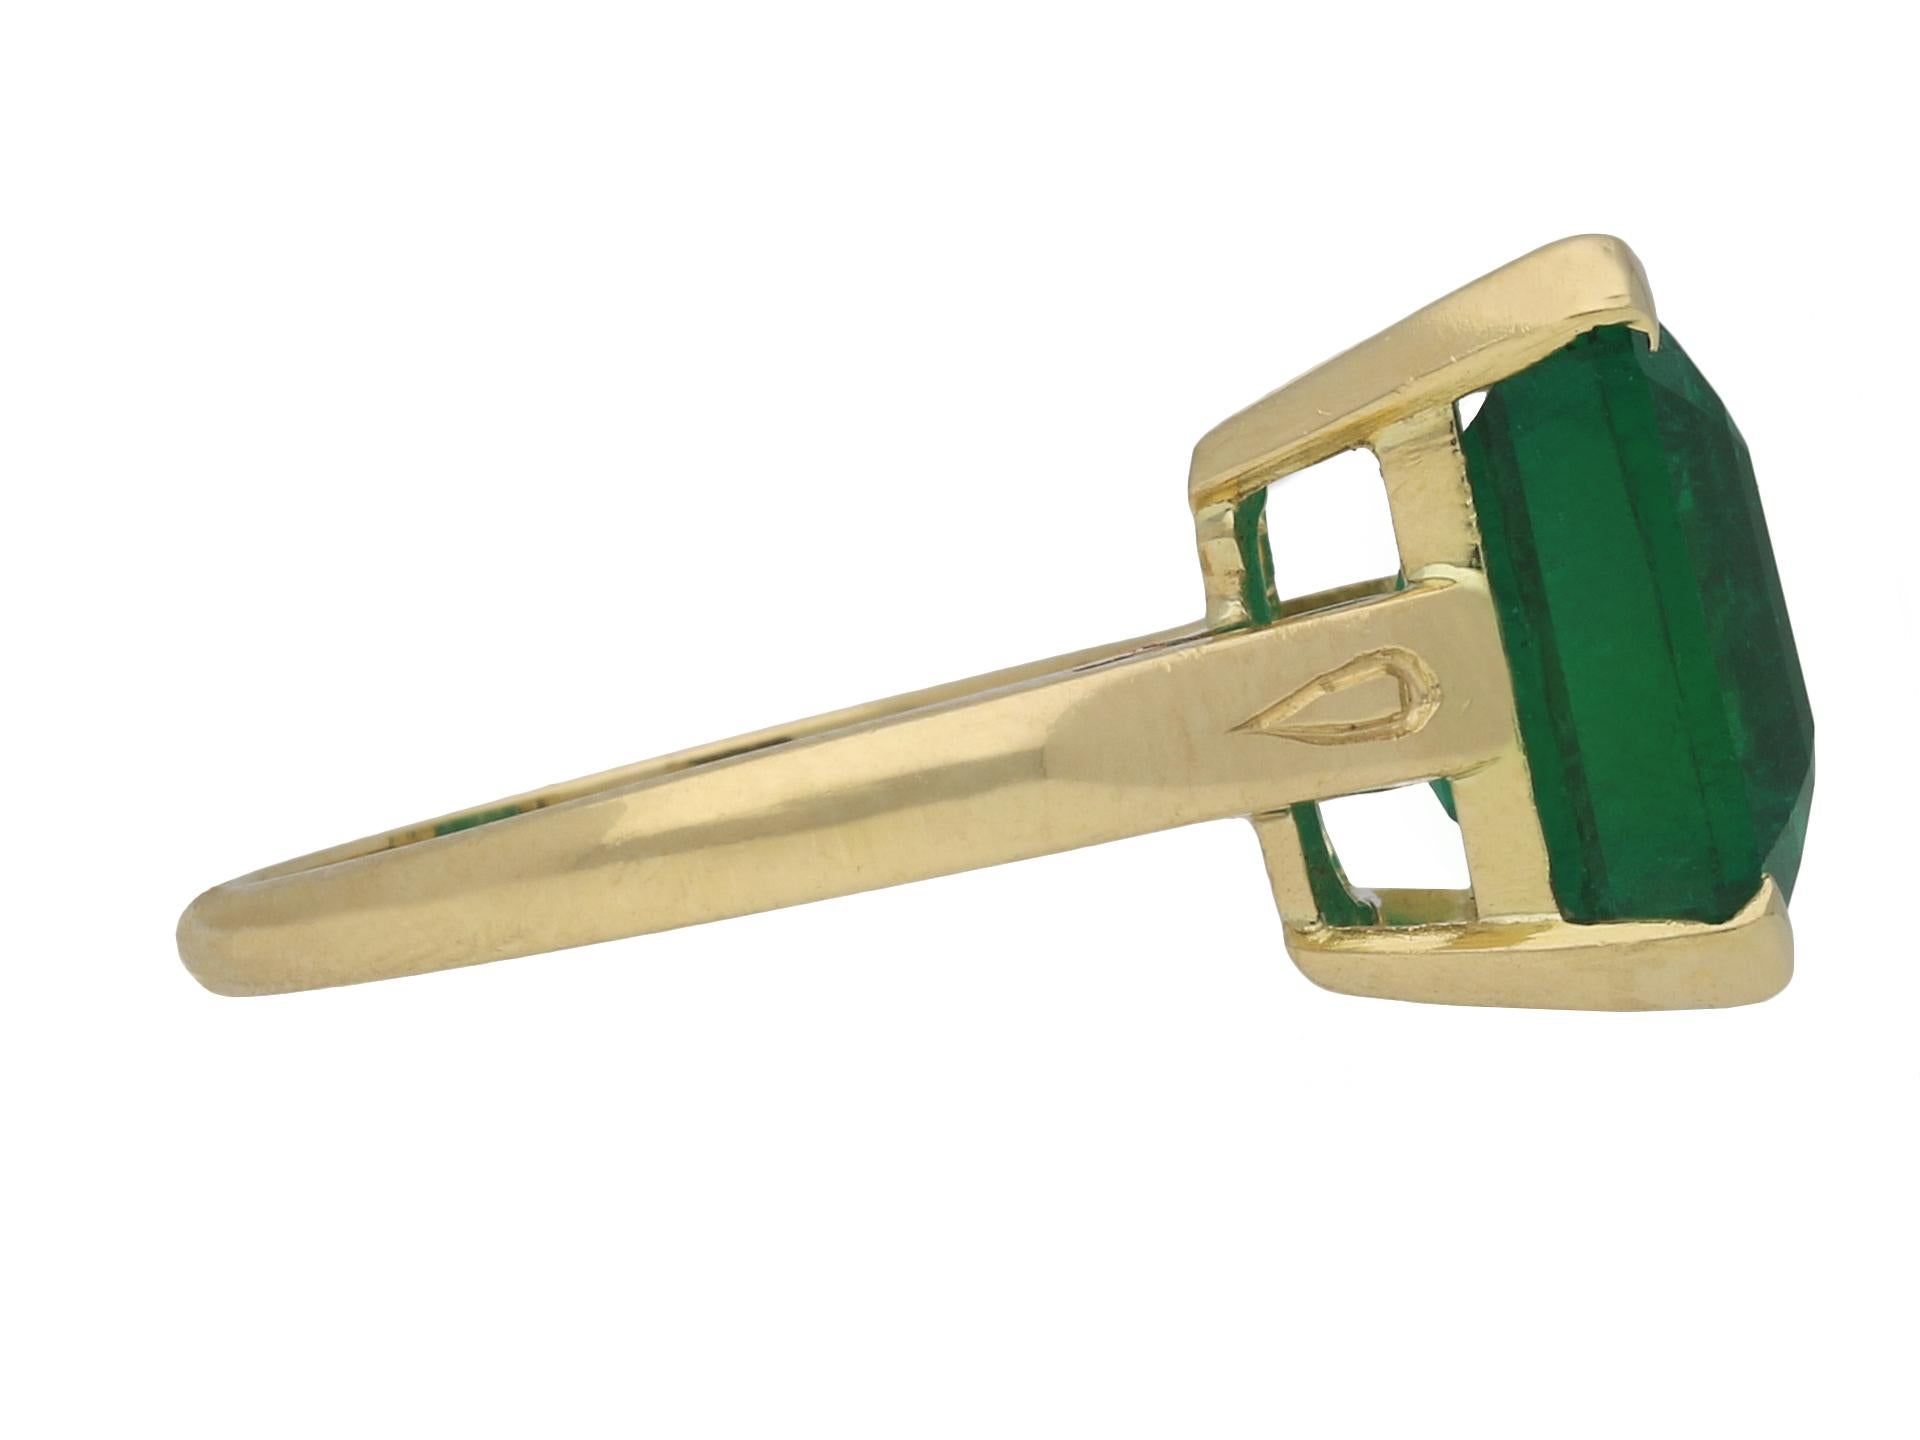 Vintage emerald solitaire ring. Centrally set with an octagonal emerald-cut natural Zambian emerald with moderate clarity enhancement in an open back claw setting with an approximate weight of 5.30 carats, to a striking solitaire design featuring